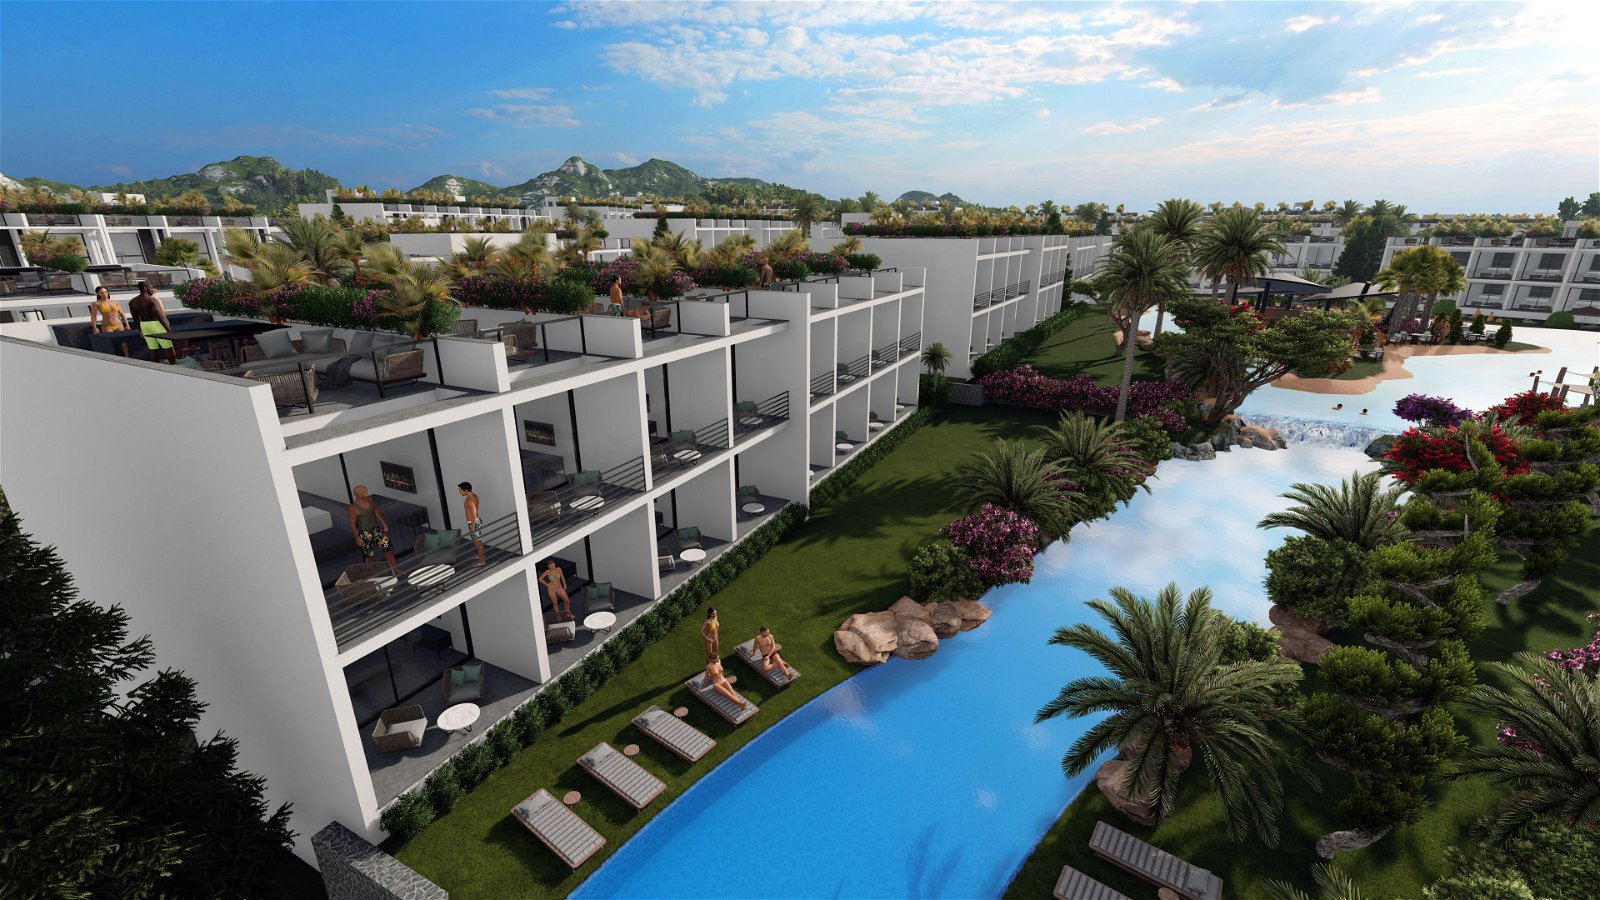 For Sale Apartments  Studio, 1+1, 2+1, 3+1 in Esentepe Northern Cyprus-f3af8a69-e50b-49b2-878c-4f52ee7df3a3